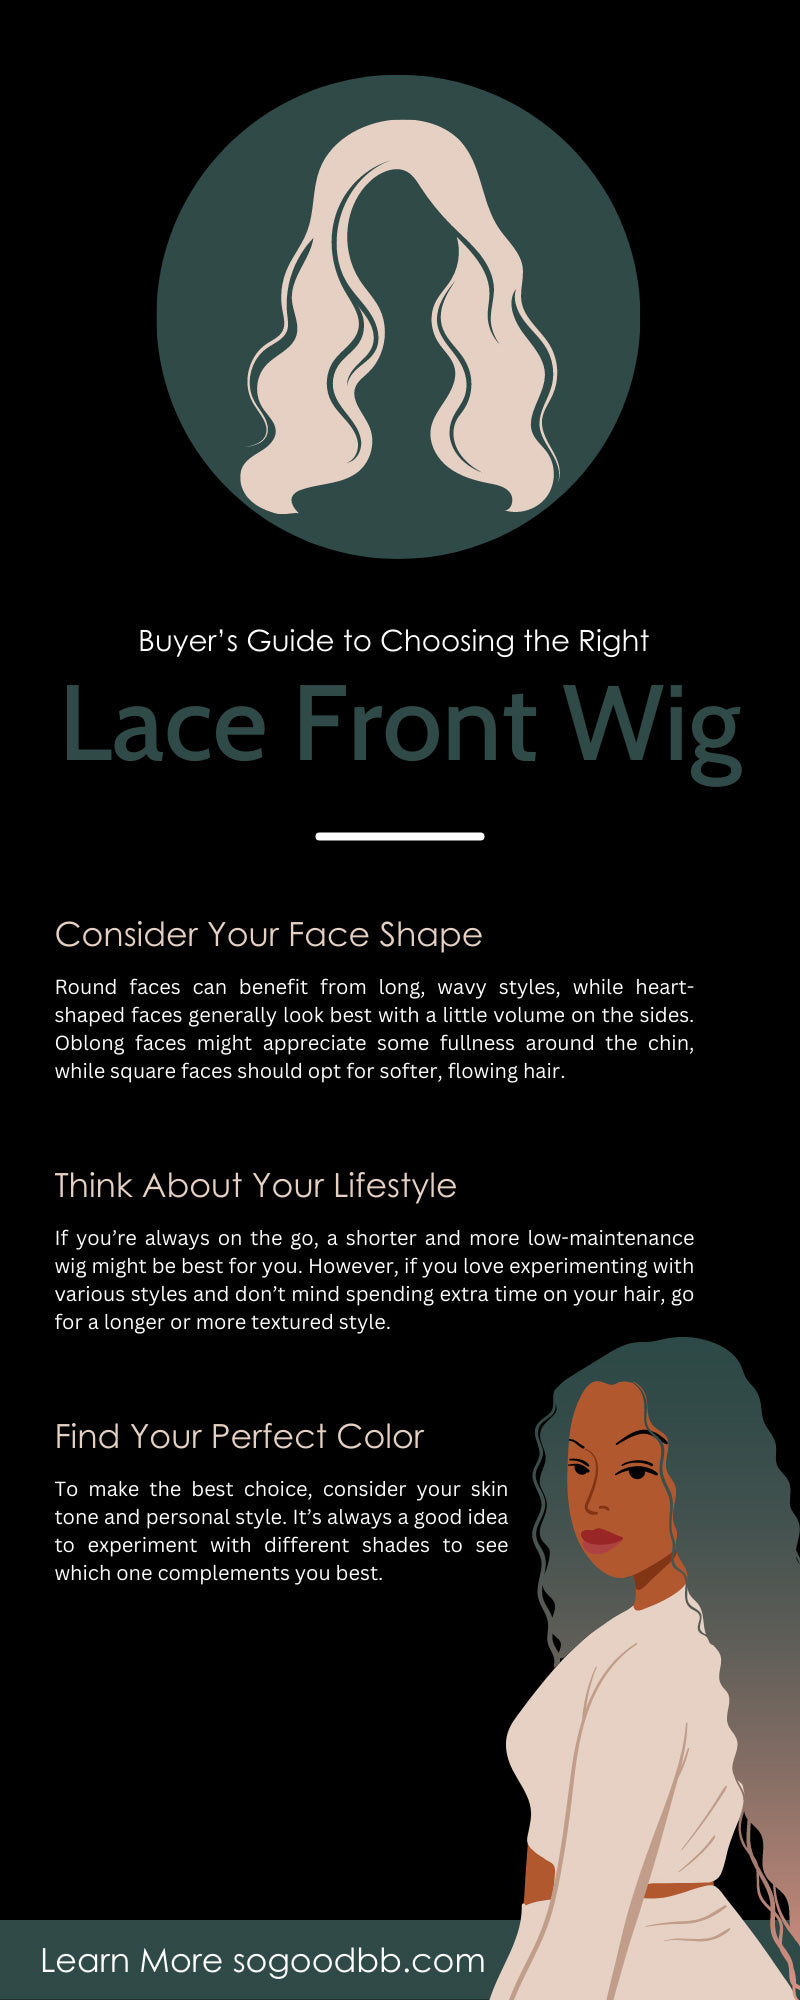 Buyer’s Guide to Choosing the Right Lace Front Wig